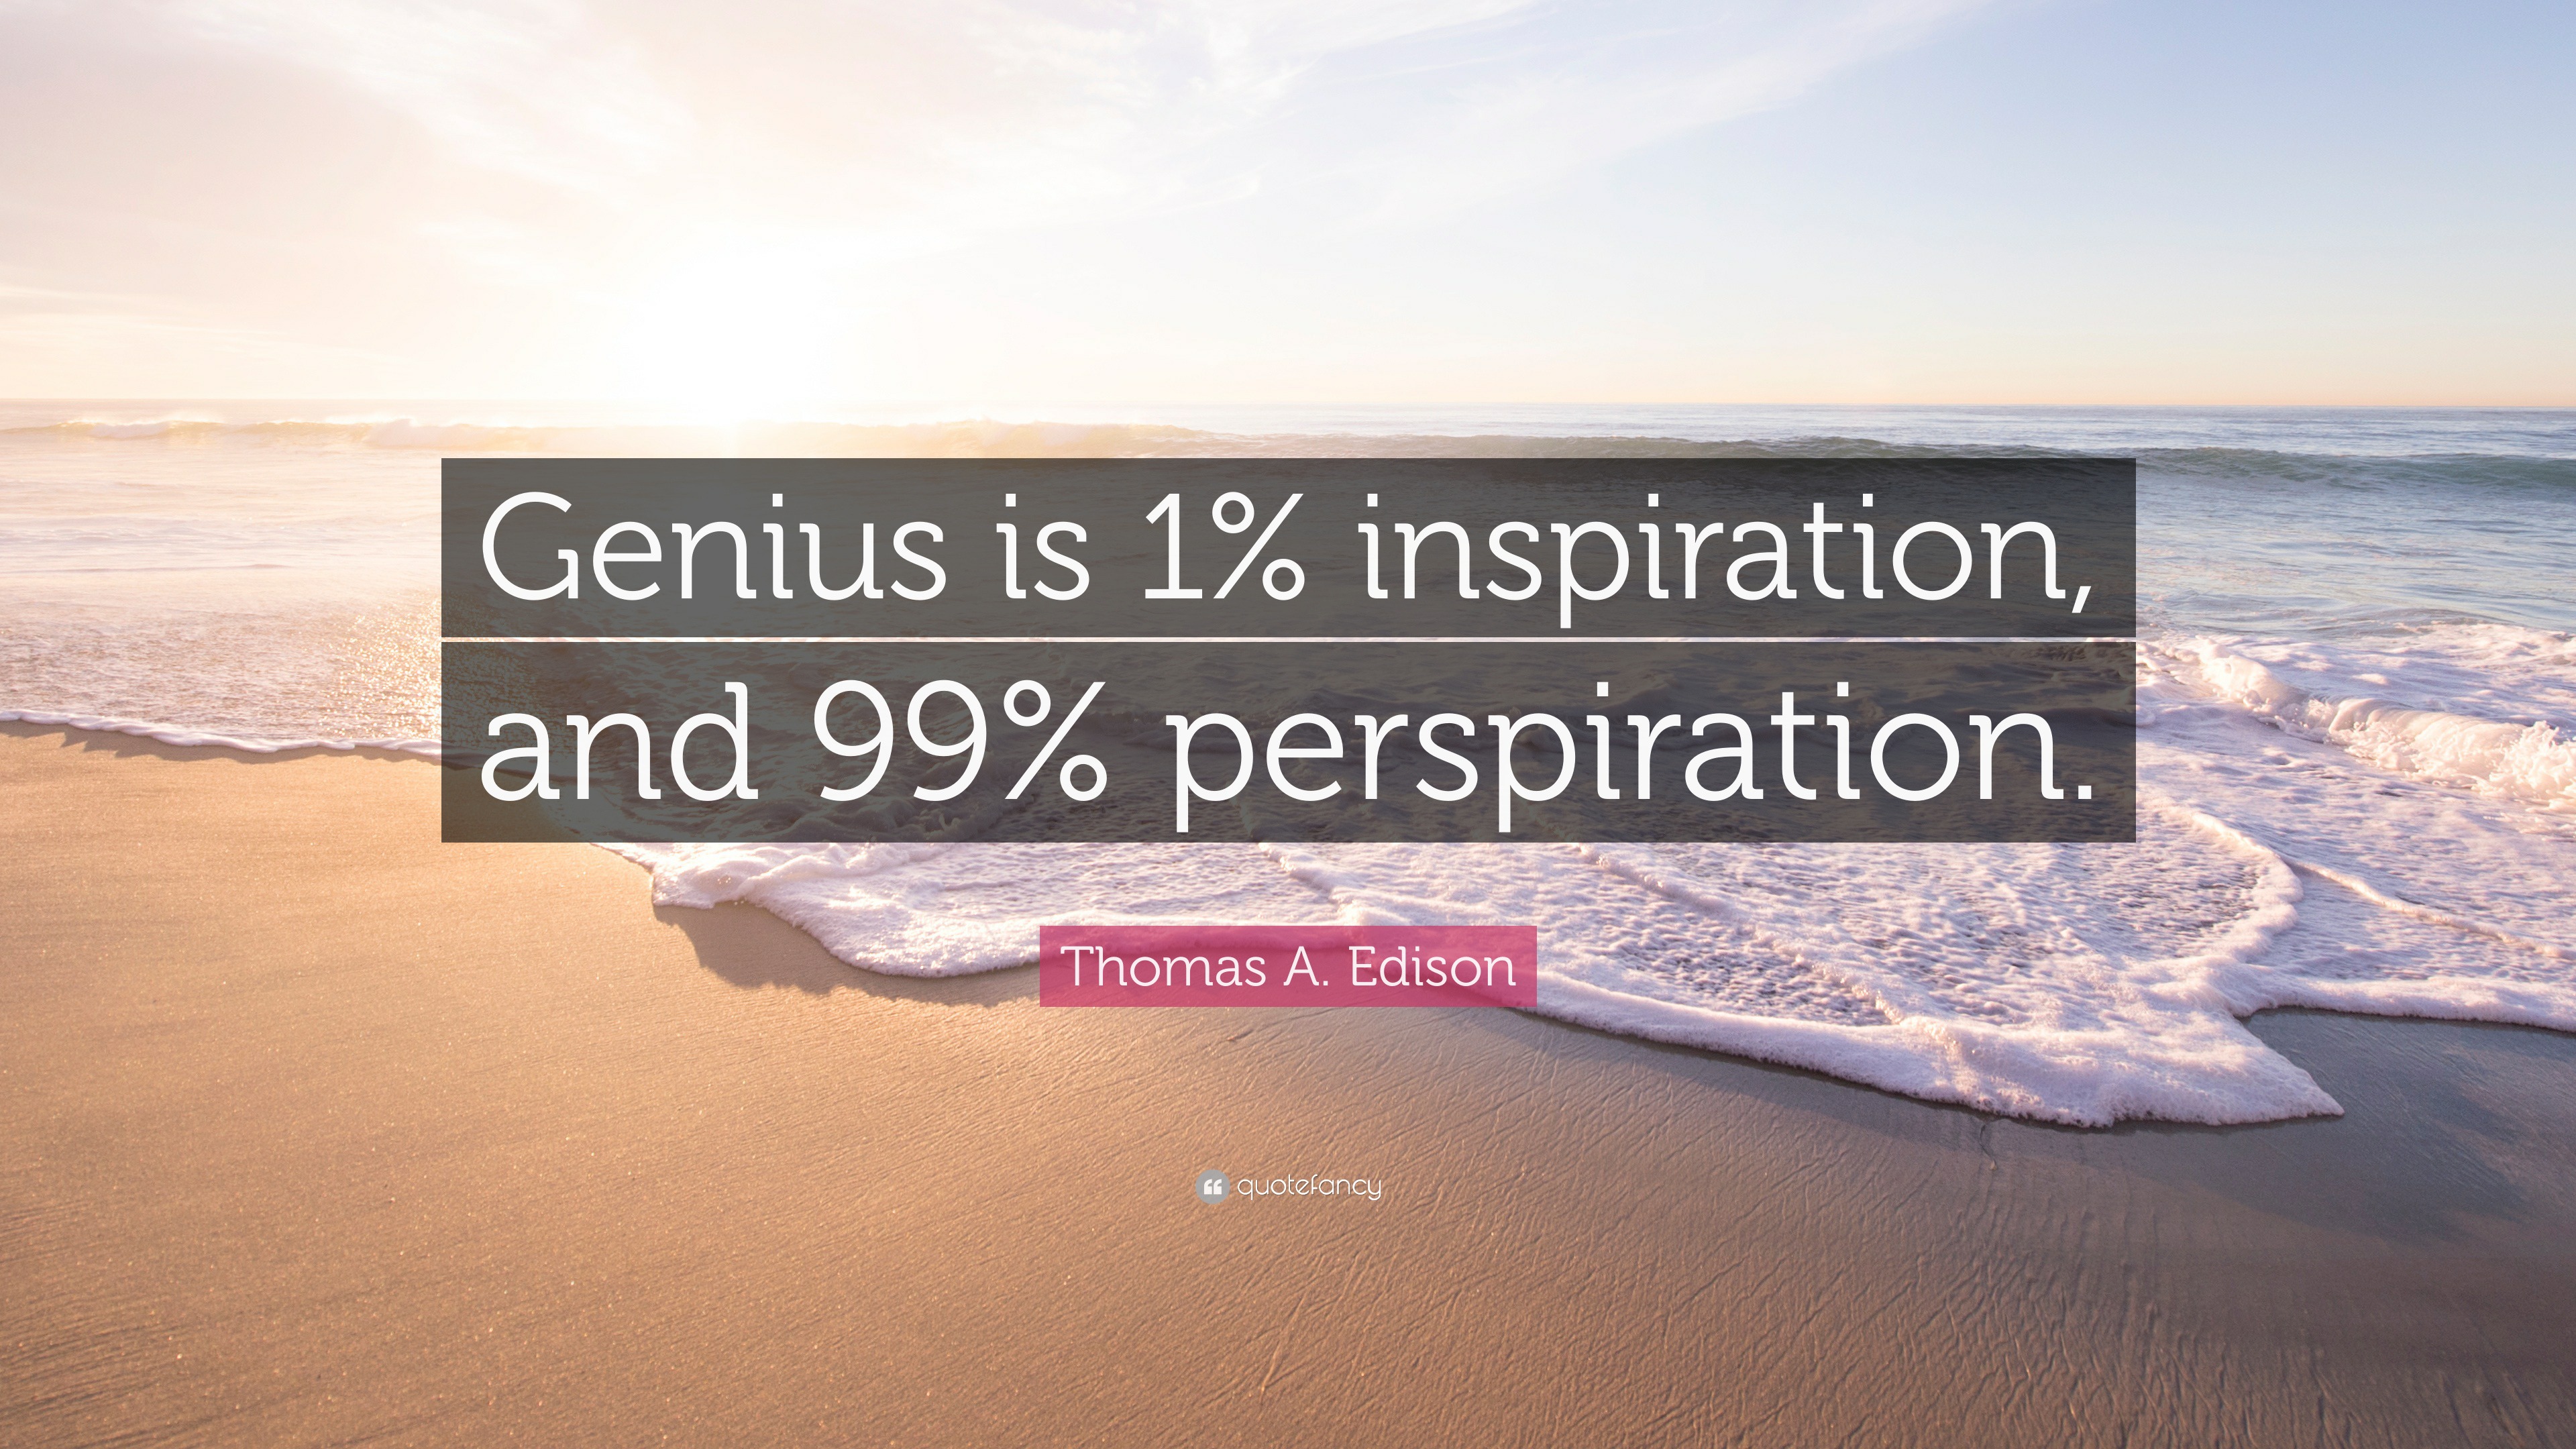 Thomas A. Edison Quote: “Genius is 1% inspiration, and 99% perspiration